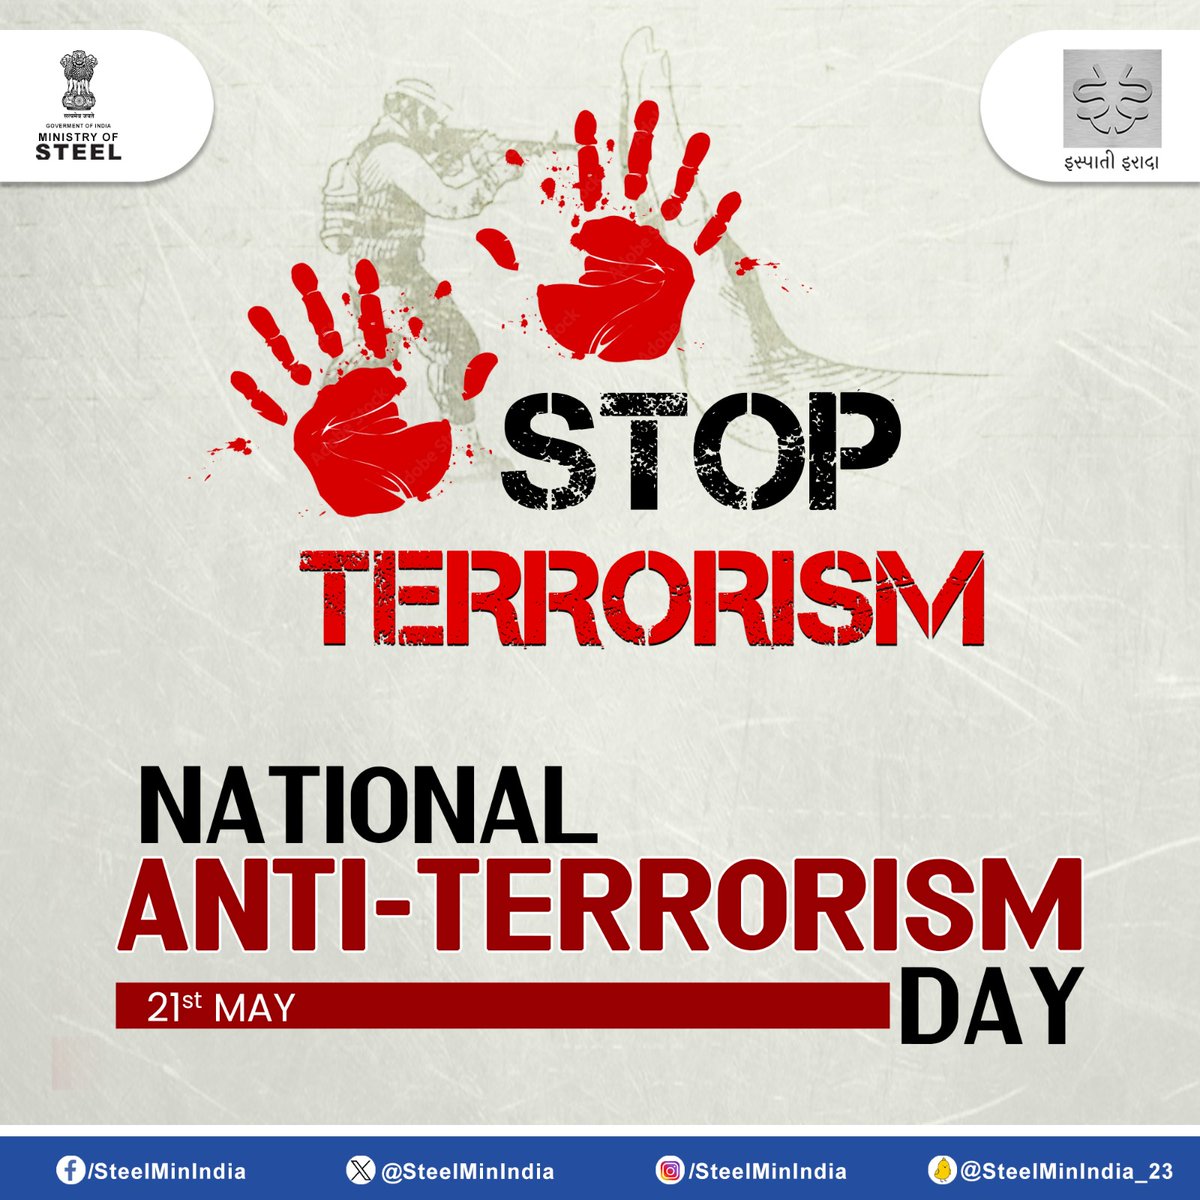 Today, on National Anti-Terrorism Day, let's remember and honor those who have fought against terrorism. Let's pledge to stand united against violence and work towards a world of peace and security. #NationalAntiTerrorismDay #UnitedAgainstTerrorism